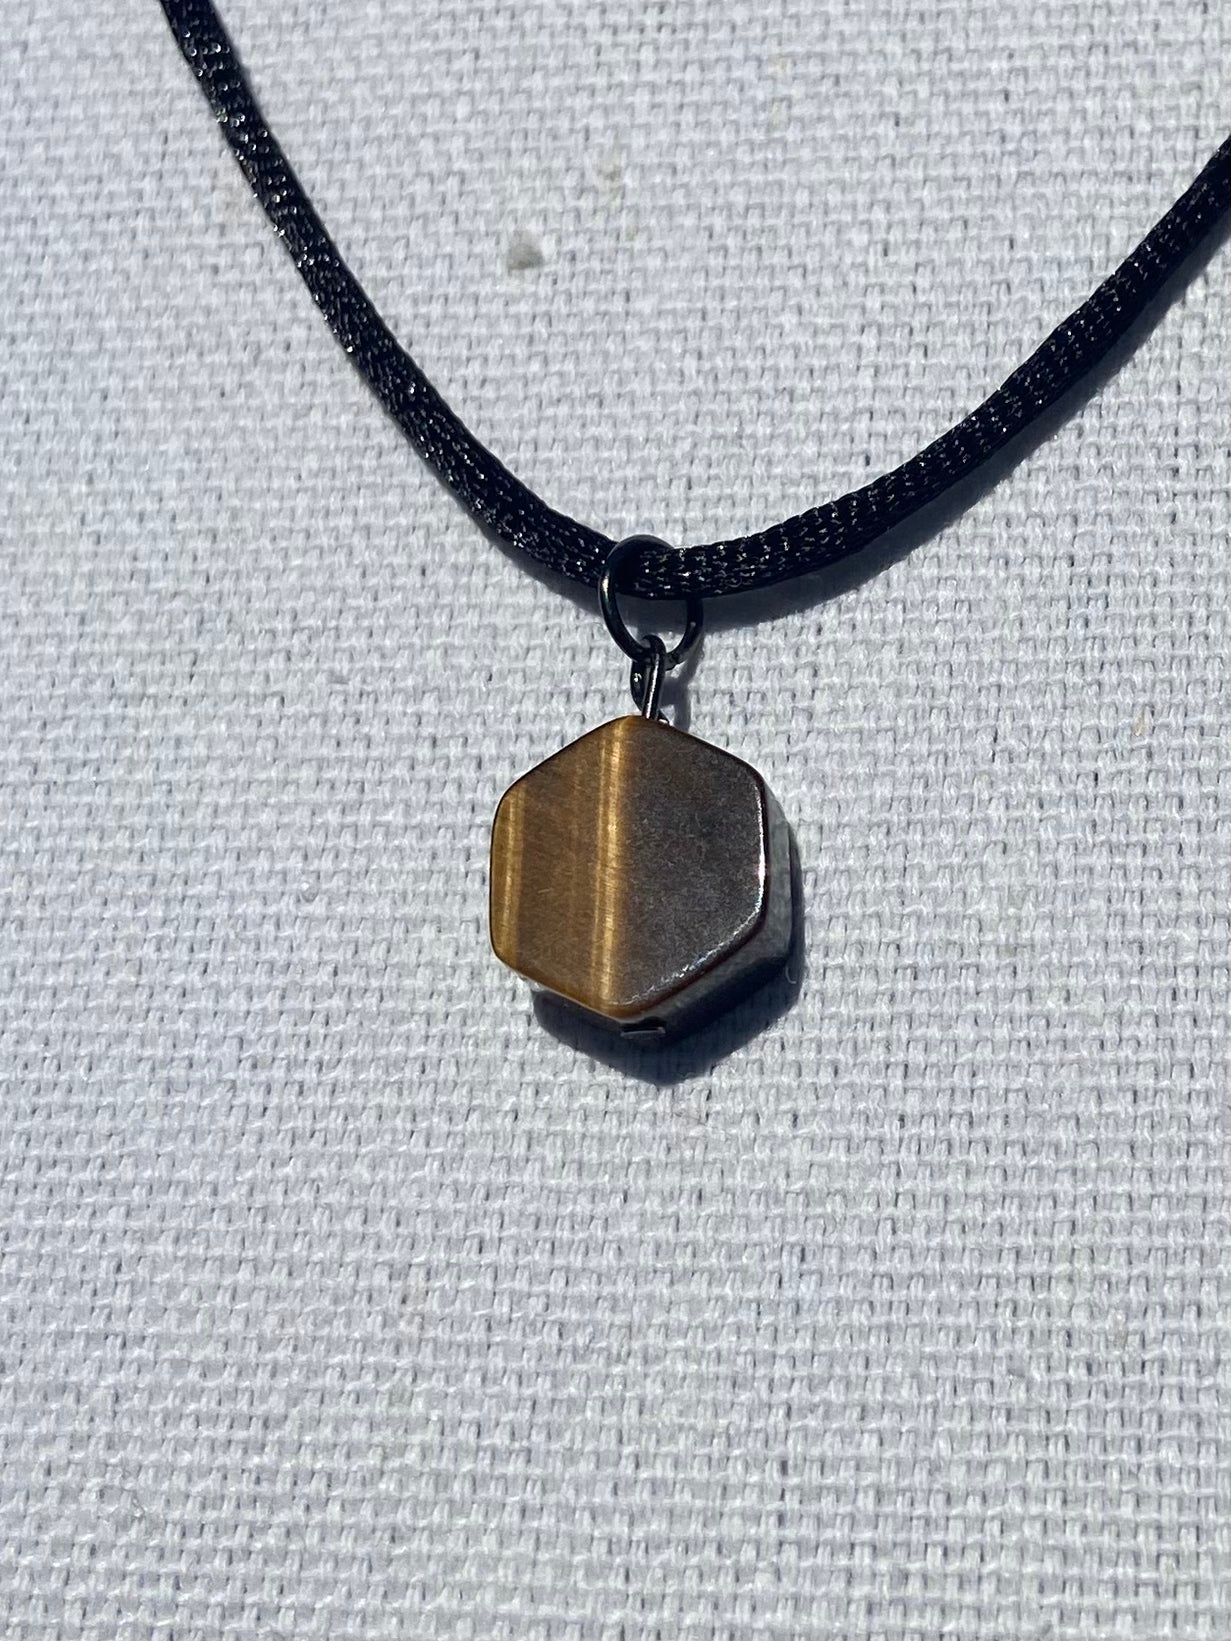 Necklace tigers eye